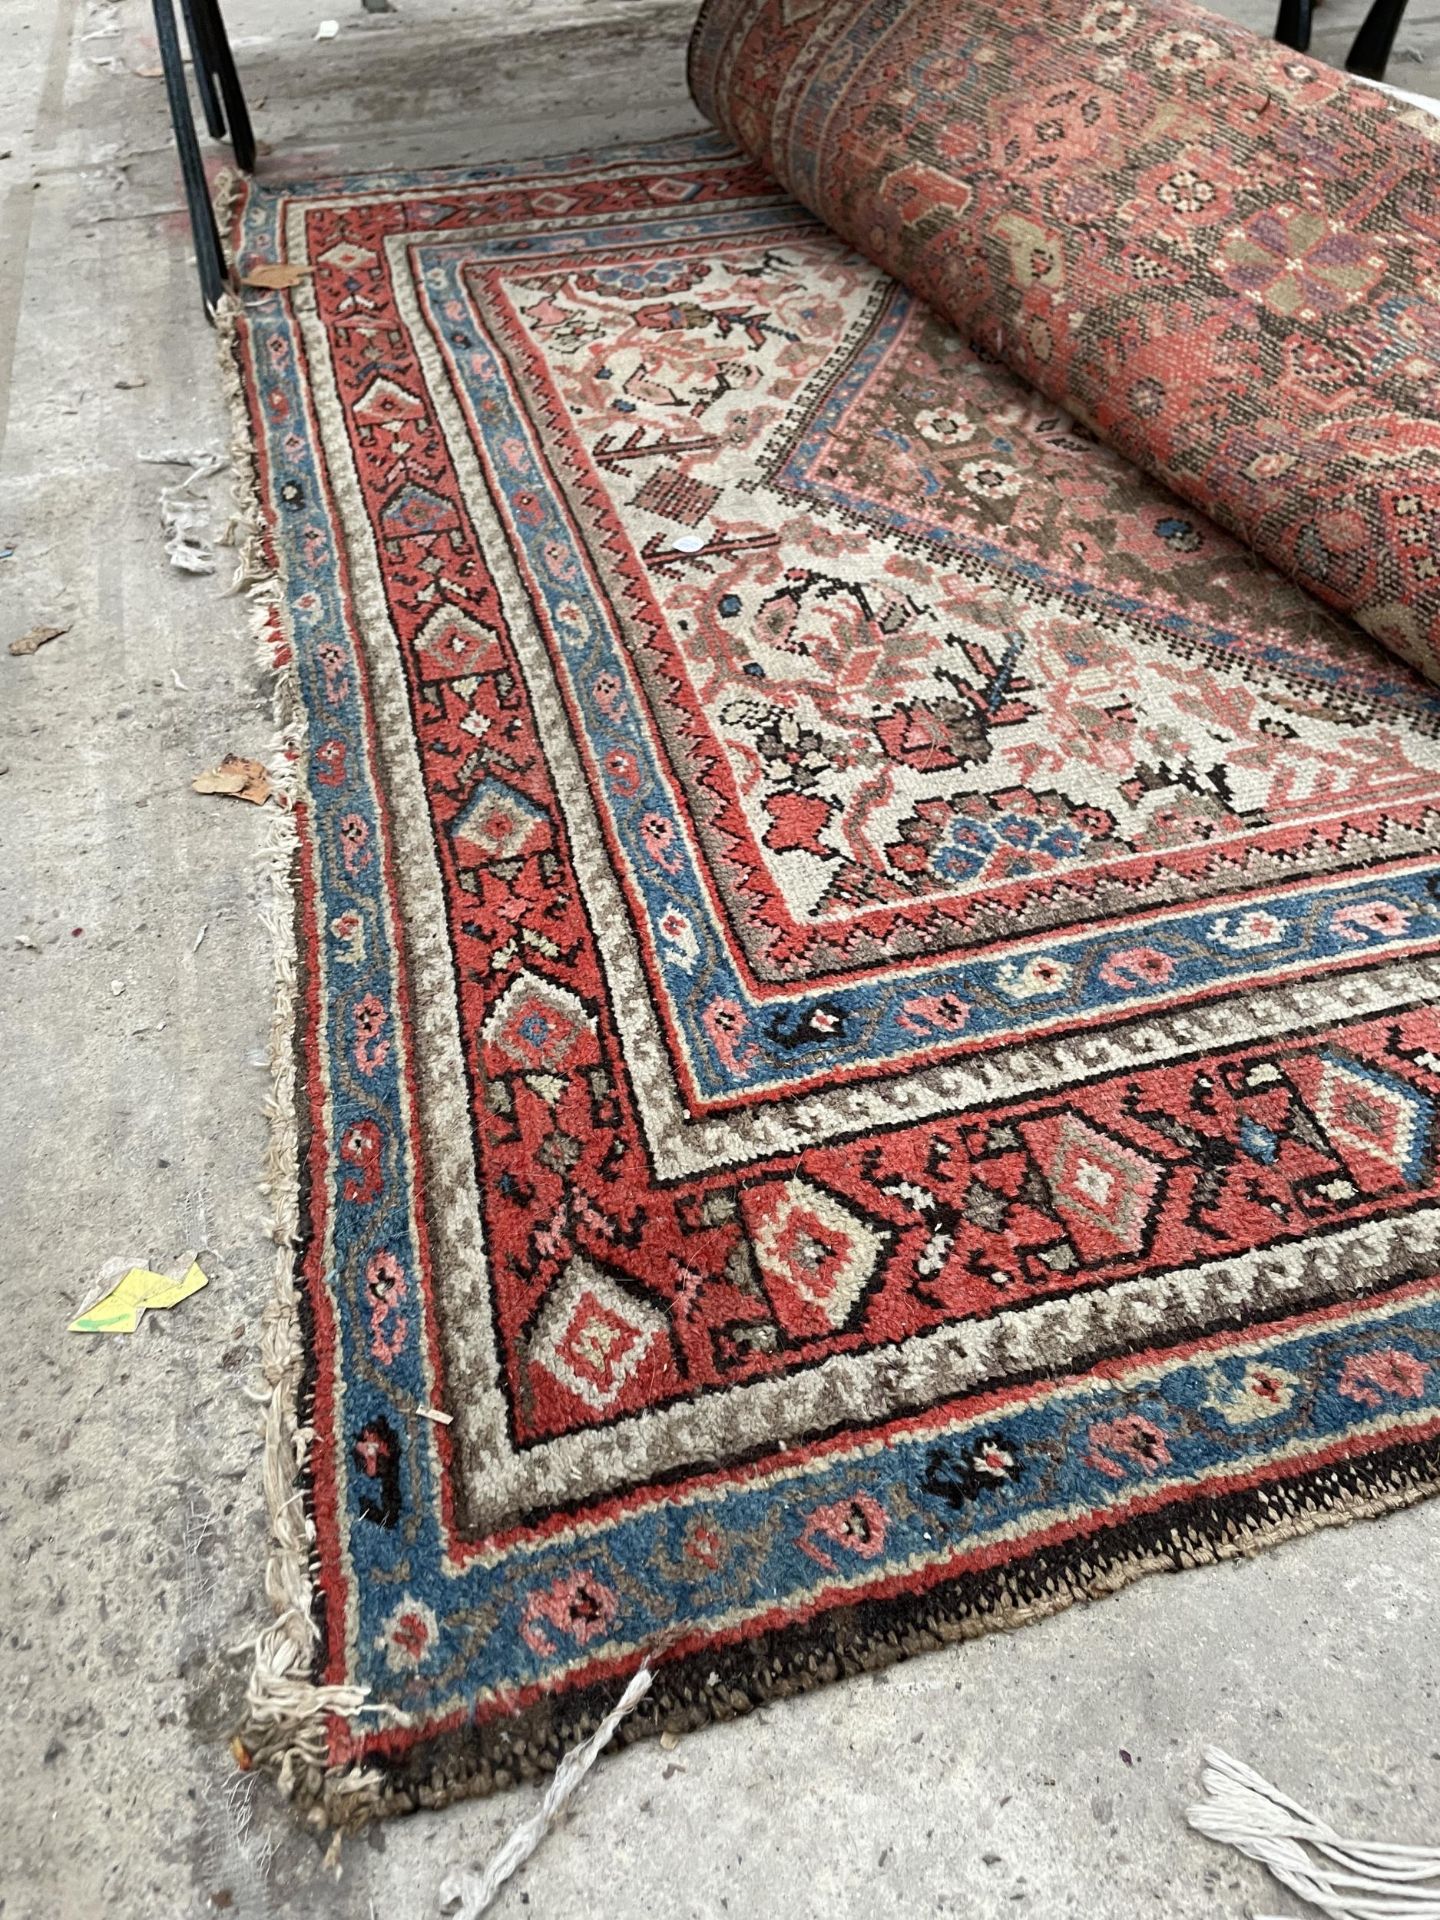 A SMALL RED AND BLUE PATTERNED FRINGED RUG - Image 2 of 2